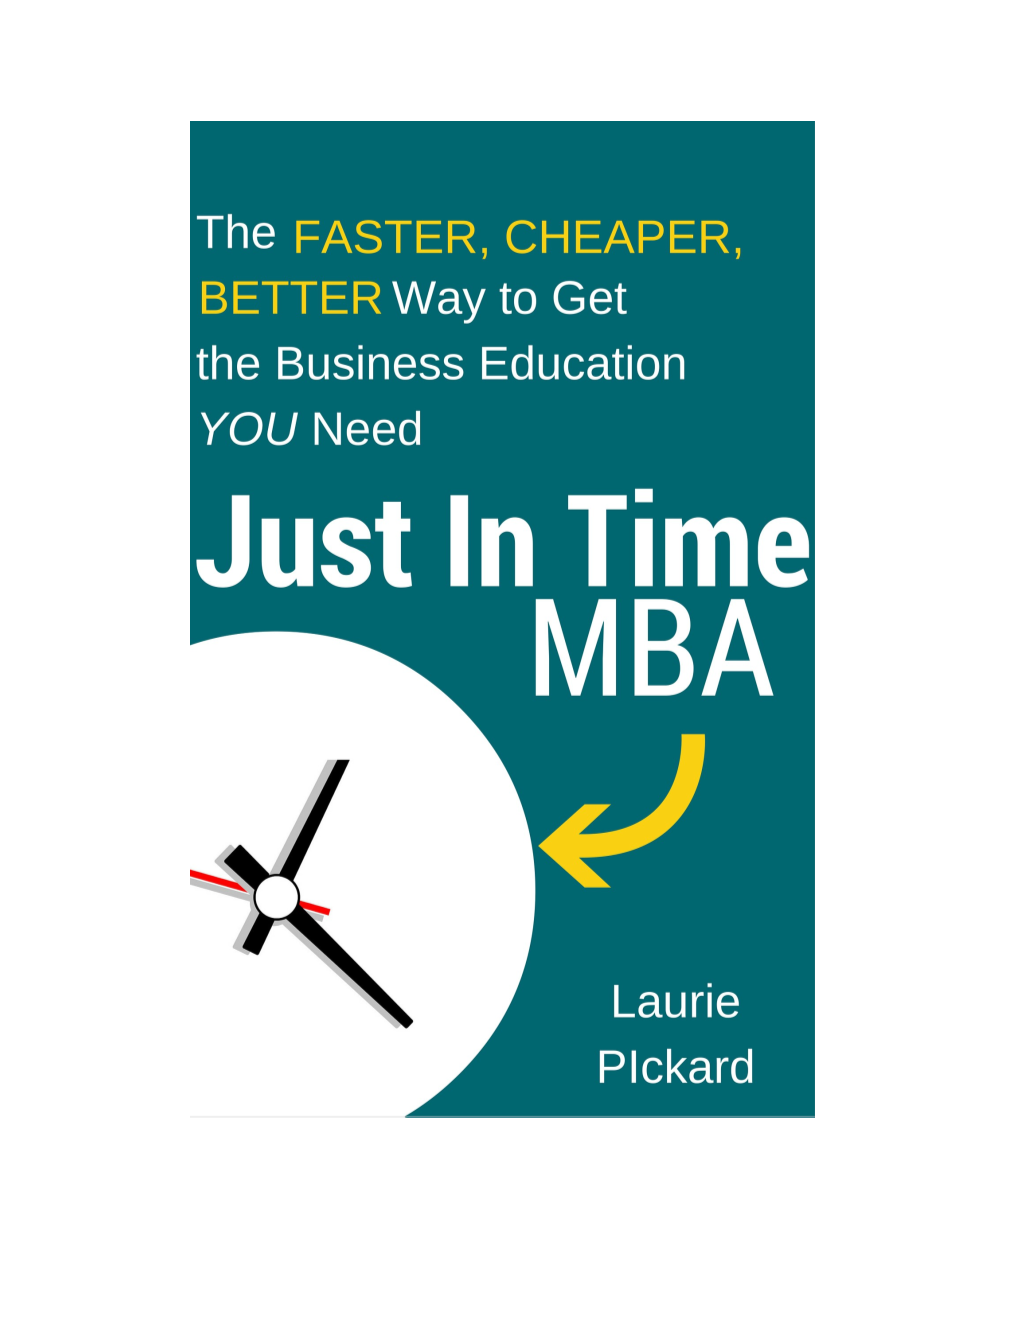 The FASTER, CHEAPER, BETTER Way to Get the Business Education YOU Need